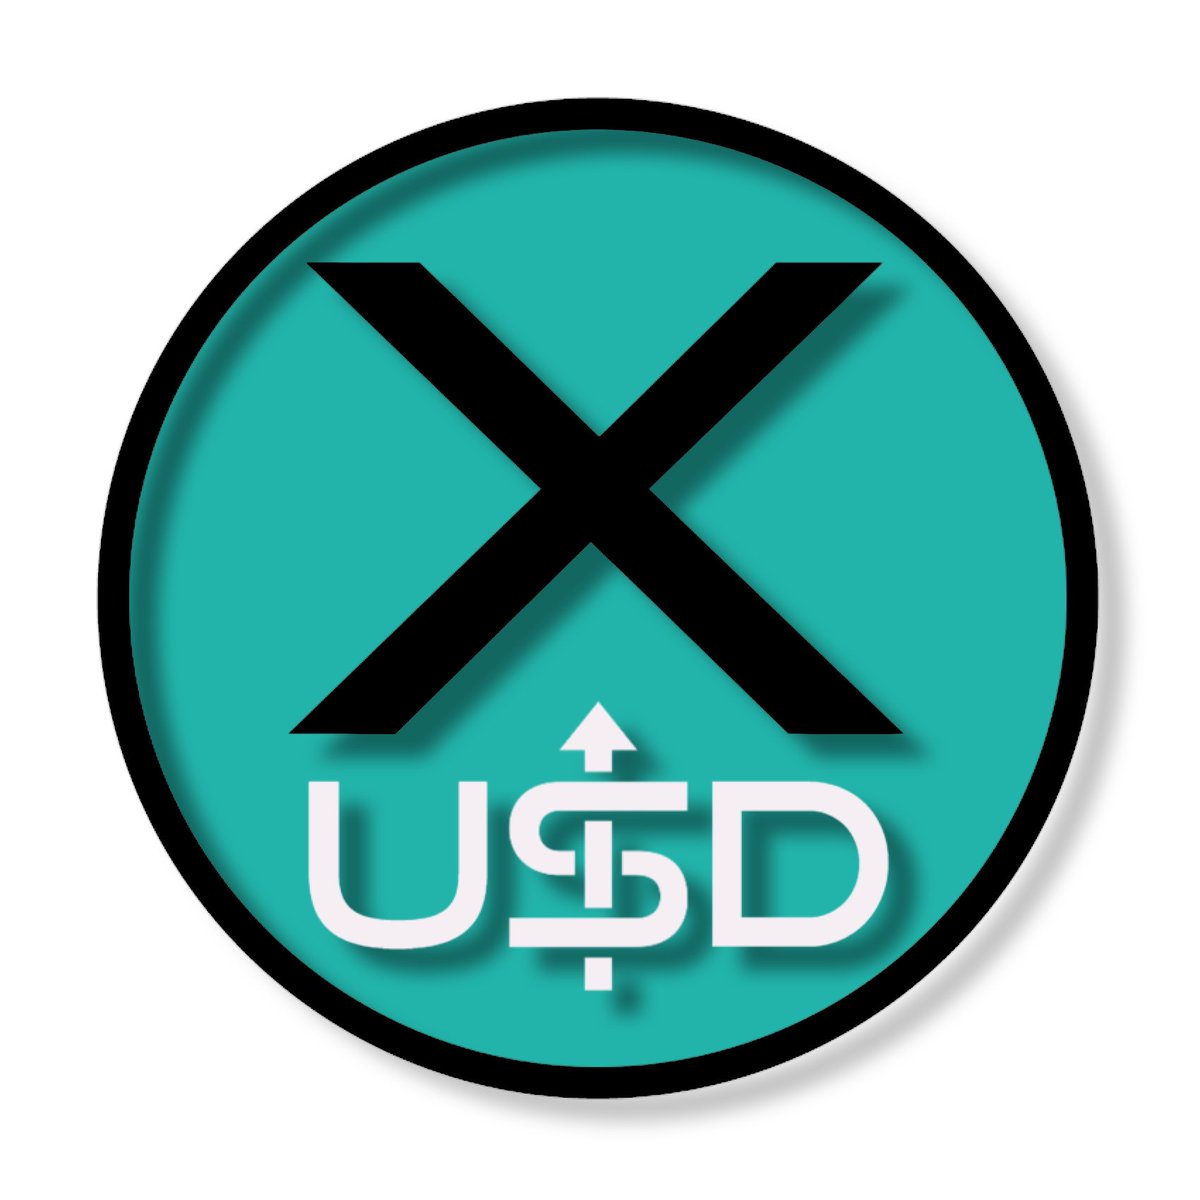 xUSD's price is 1.269488702783041132, which is up 26.949% since launch. #xUSD: #DeFi's best stablecoin staking protocol and collaborative token. #BuyTheRise